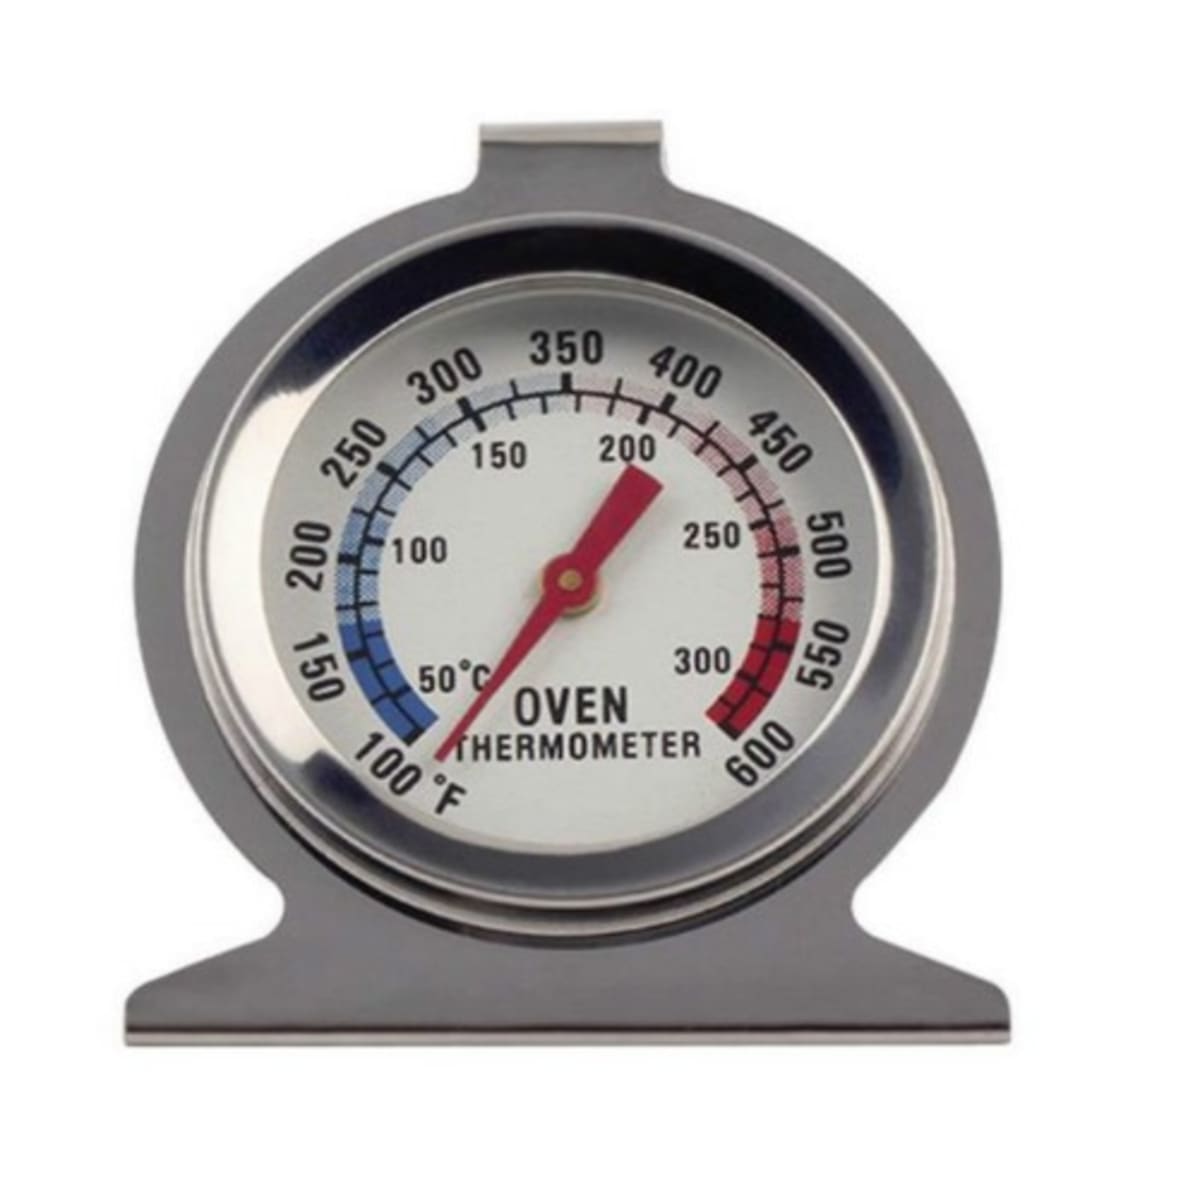 Oven Thermometer Temperature Meter Stainless Steel Oven Cooker Temperature  Gauge For Home Kitchen Food Kitchen Accessories 40%